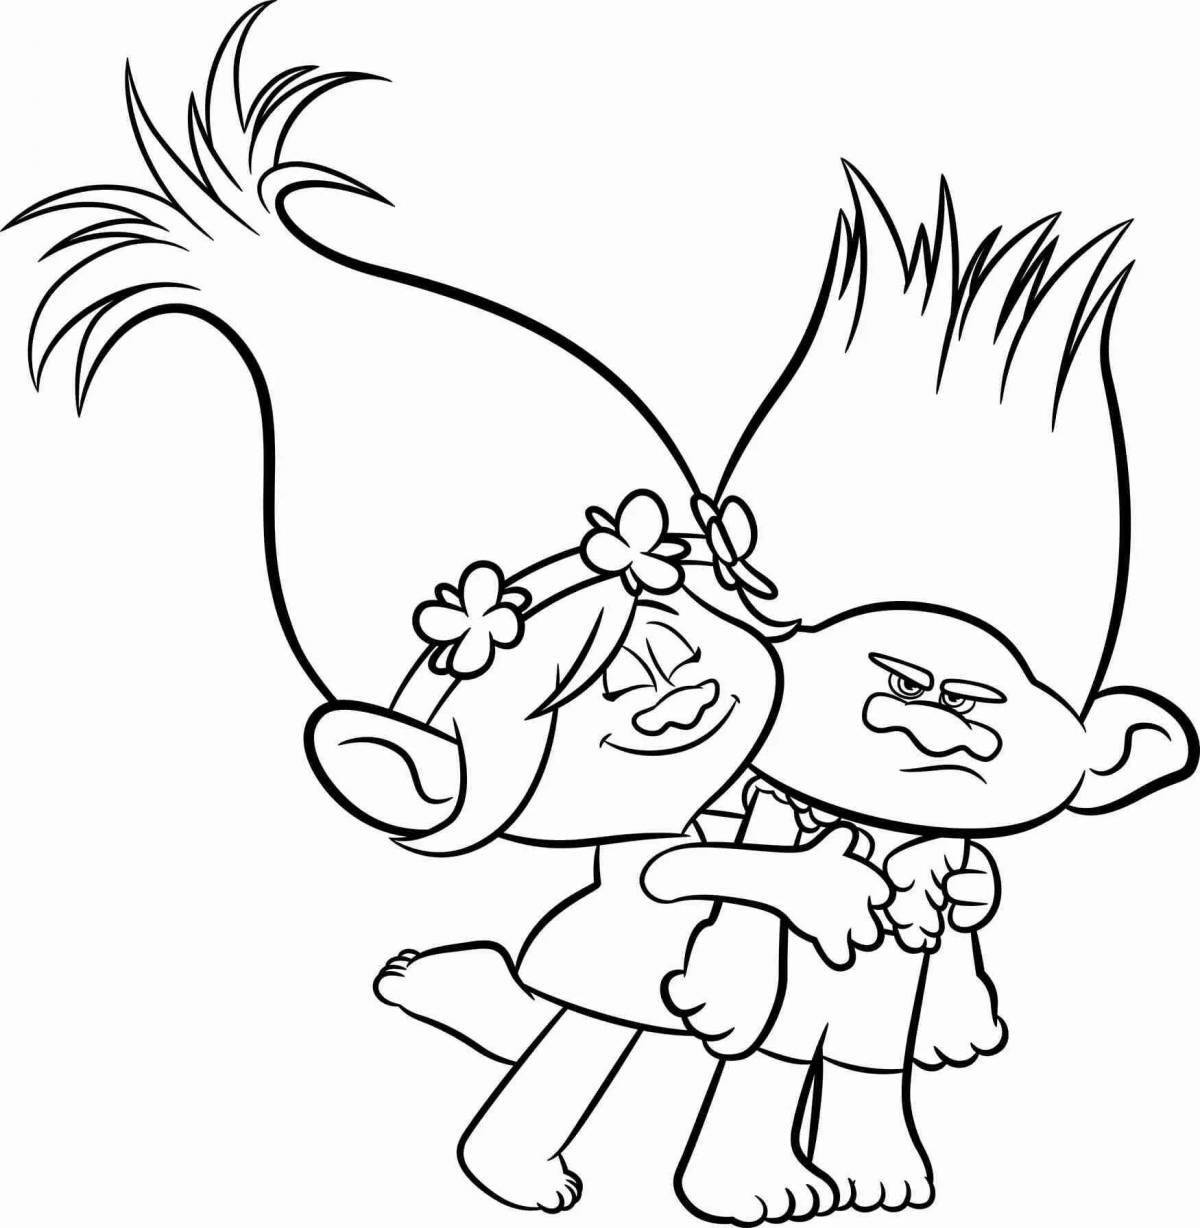 Exotic coloring book for kids trolls